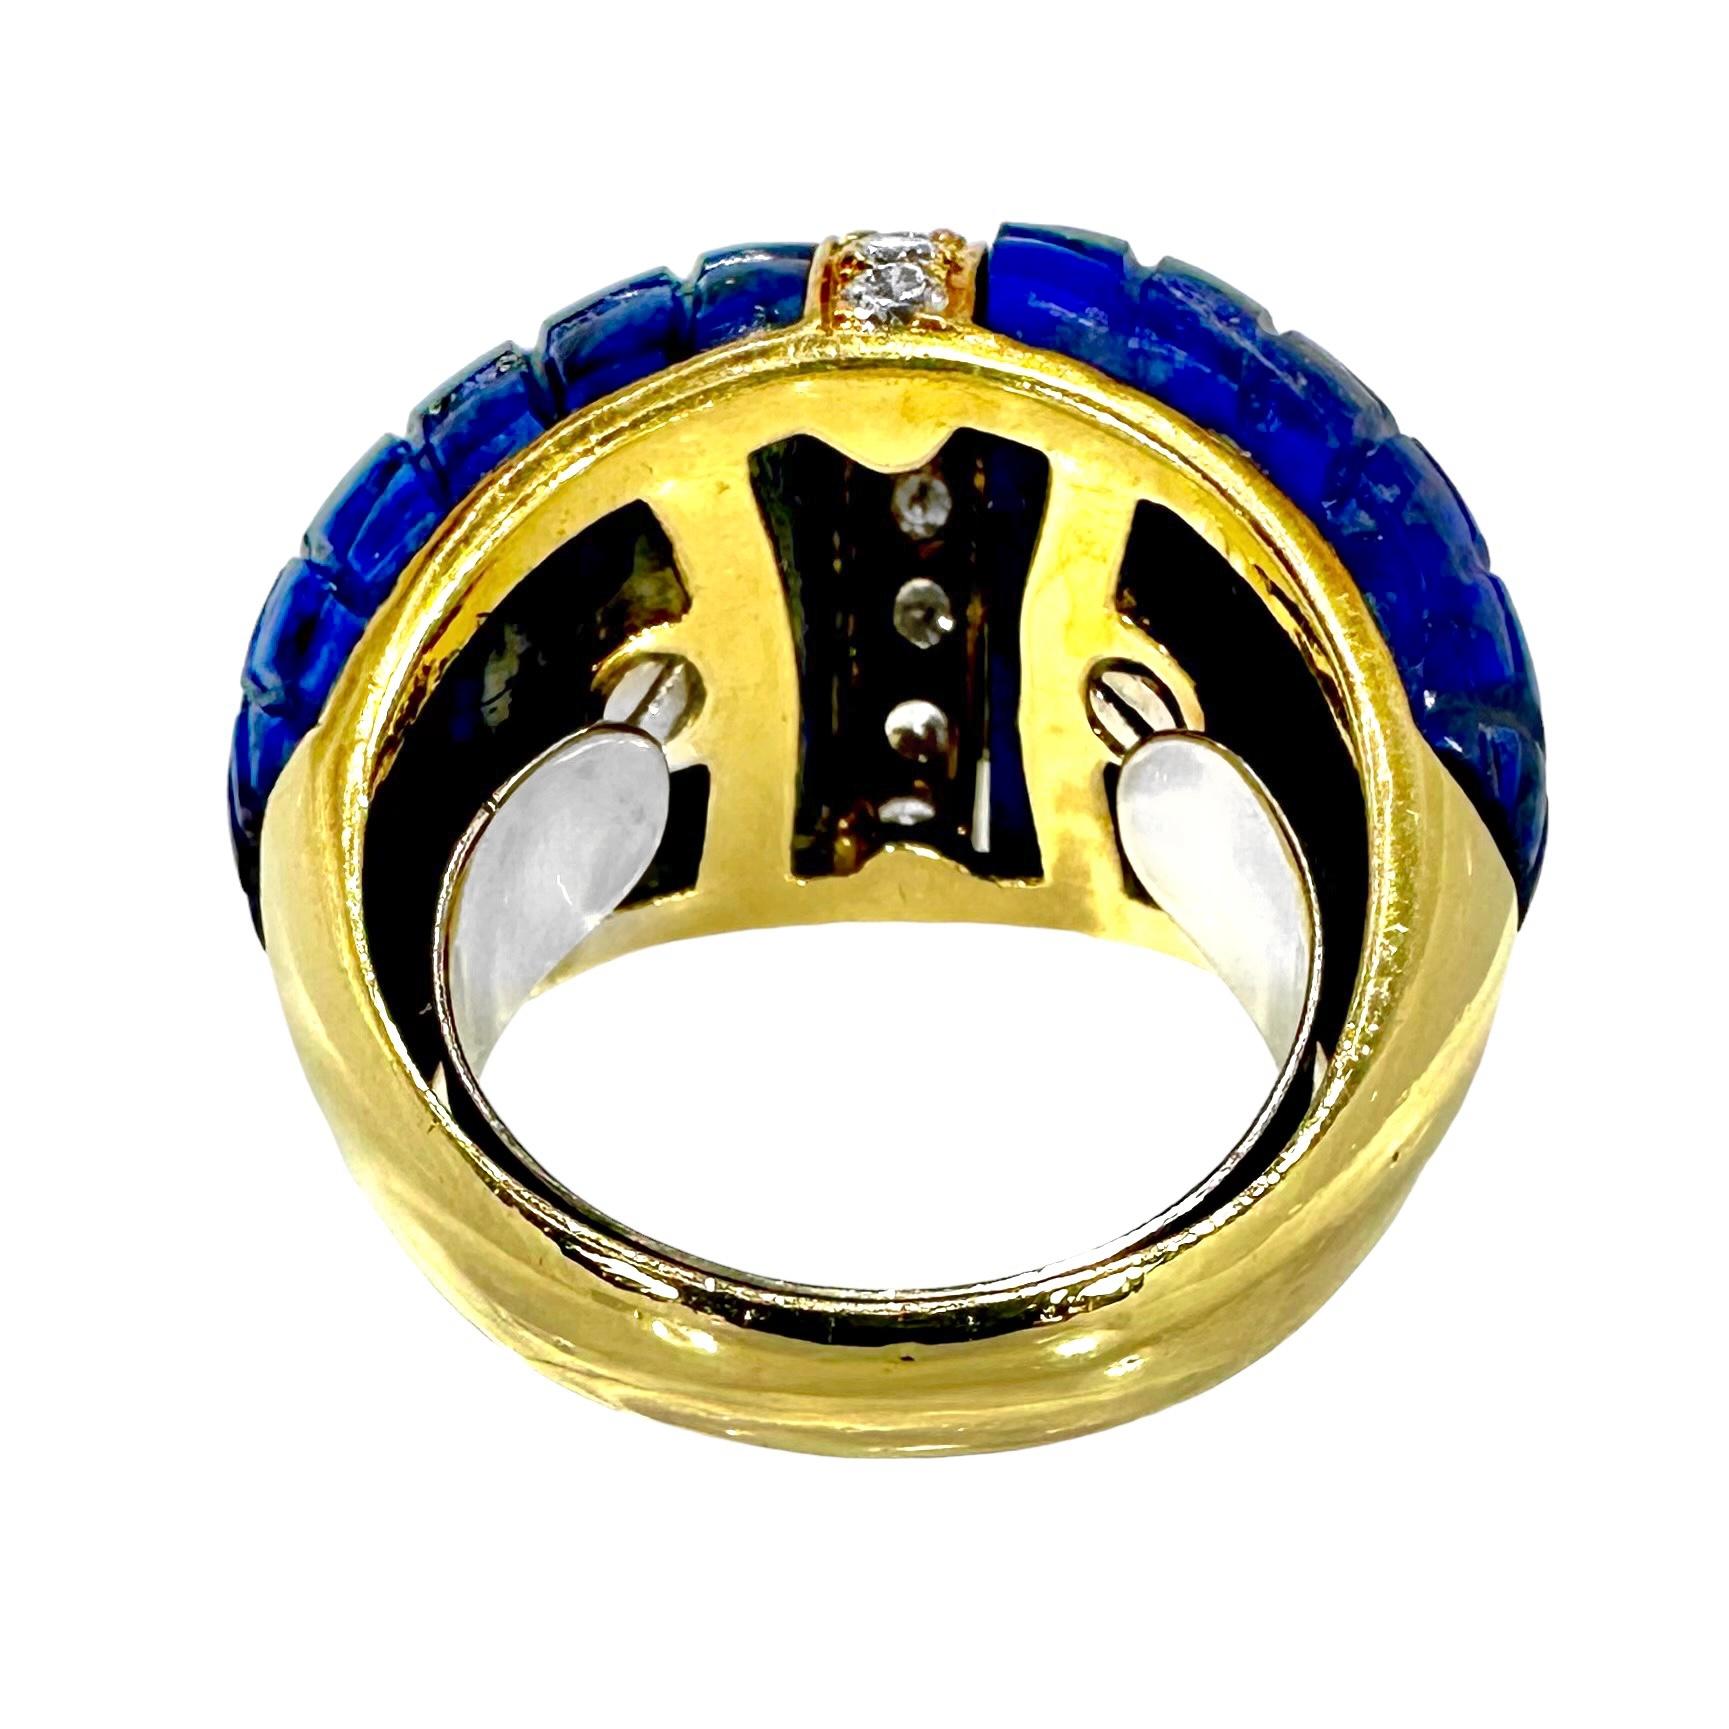 Cabochon Exquisitely Crafted Italian 18K Yellow Gold, Lapis Lazuli, and Diamond Ring For Sale